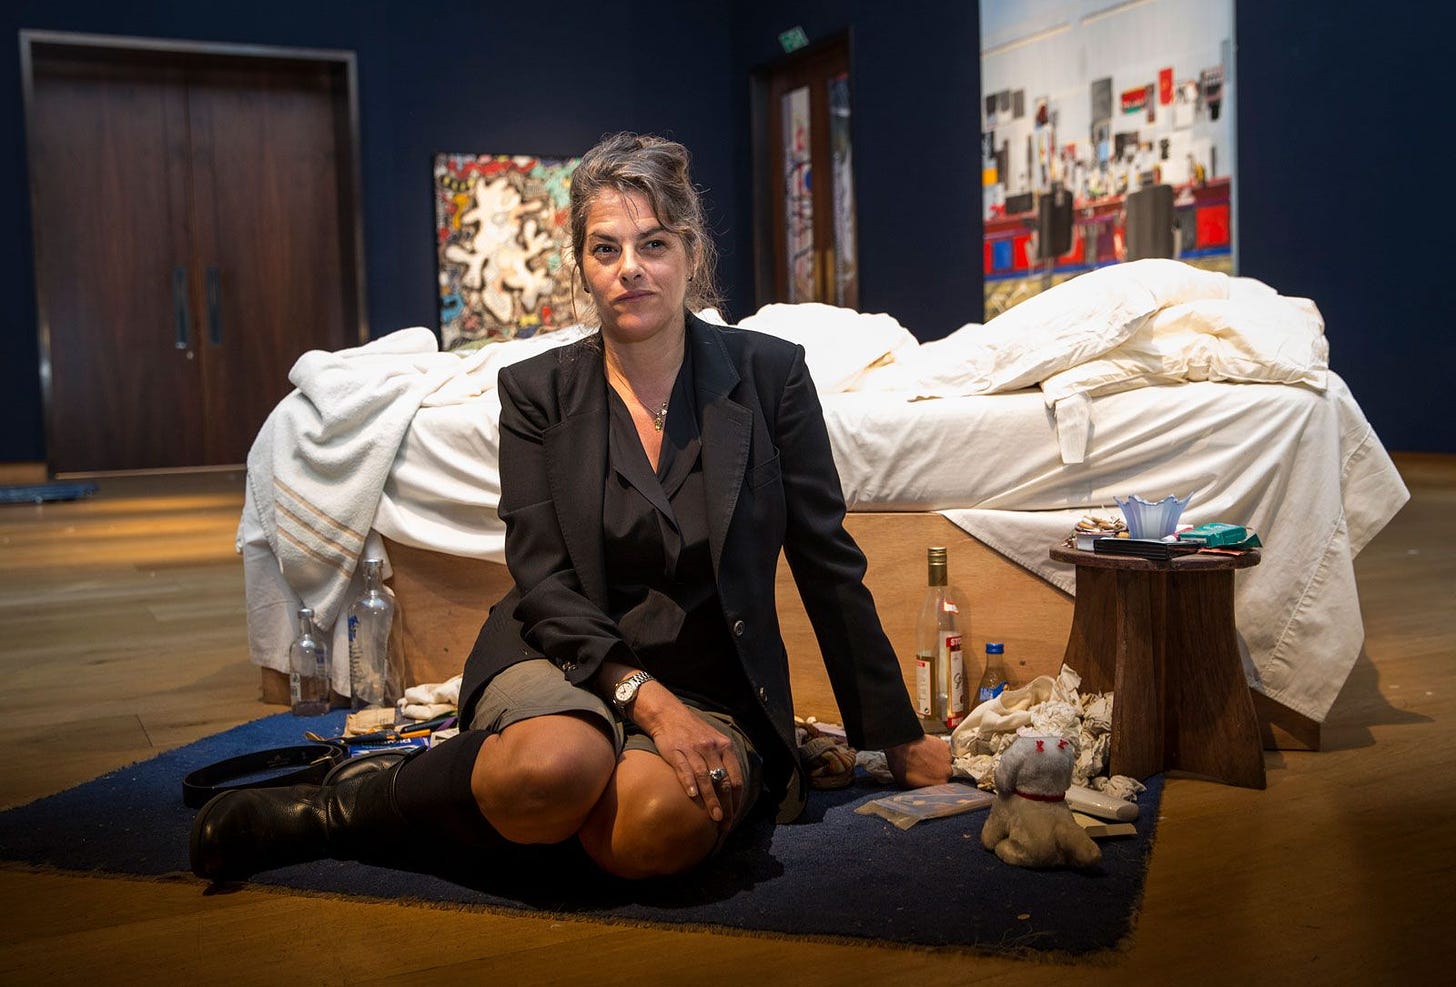 Tracey Emin | Biography, Art, My Bed, & Facts | Britannica